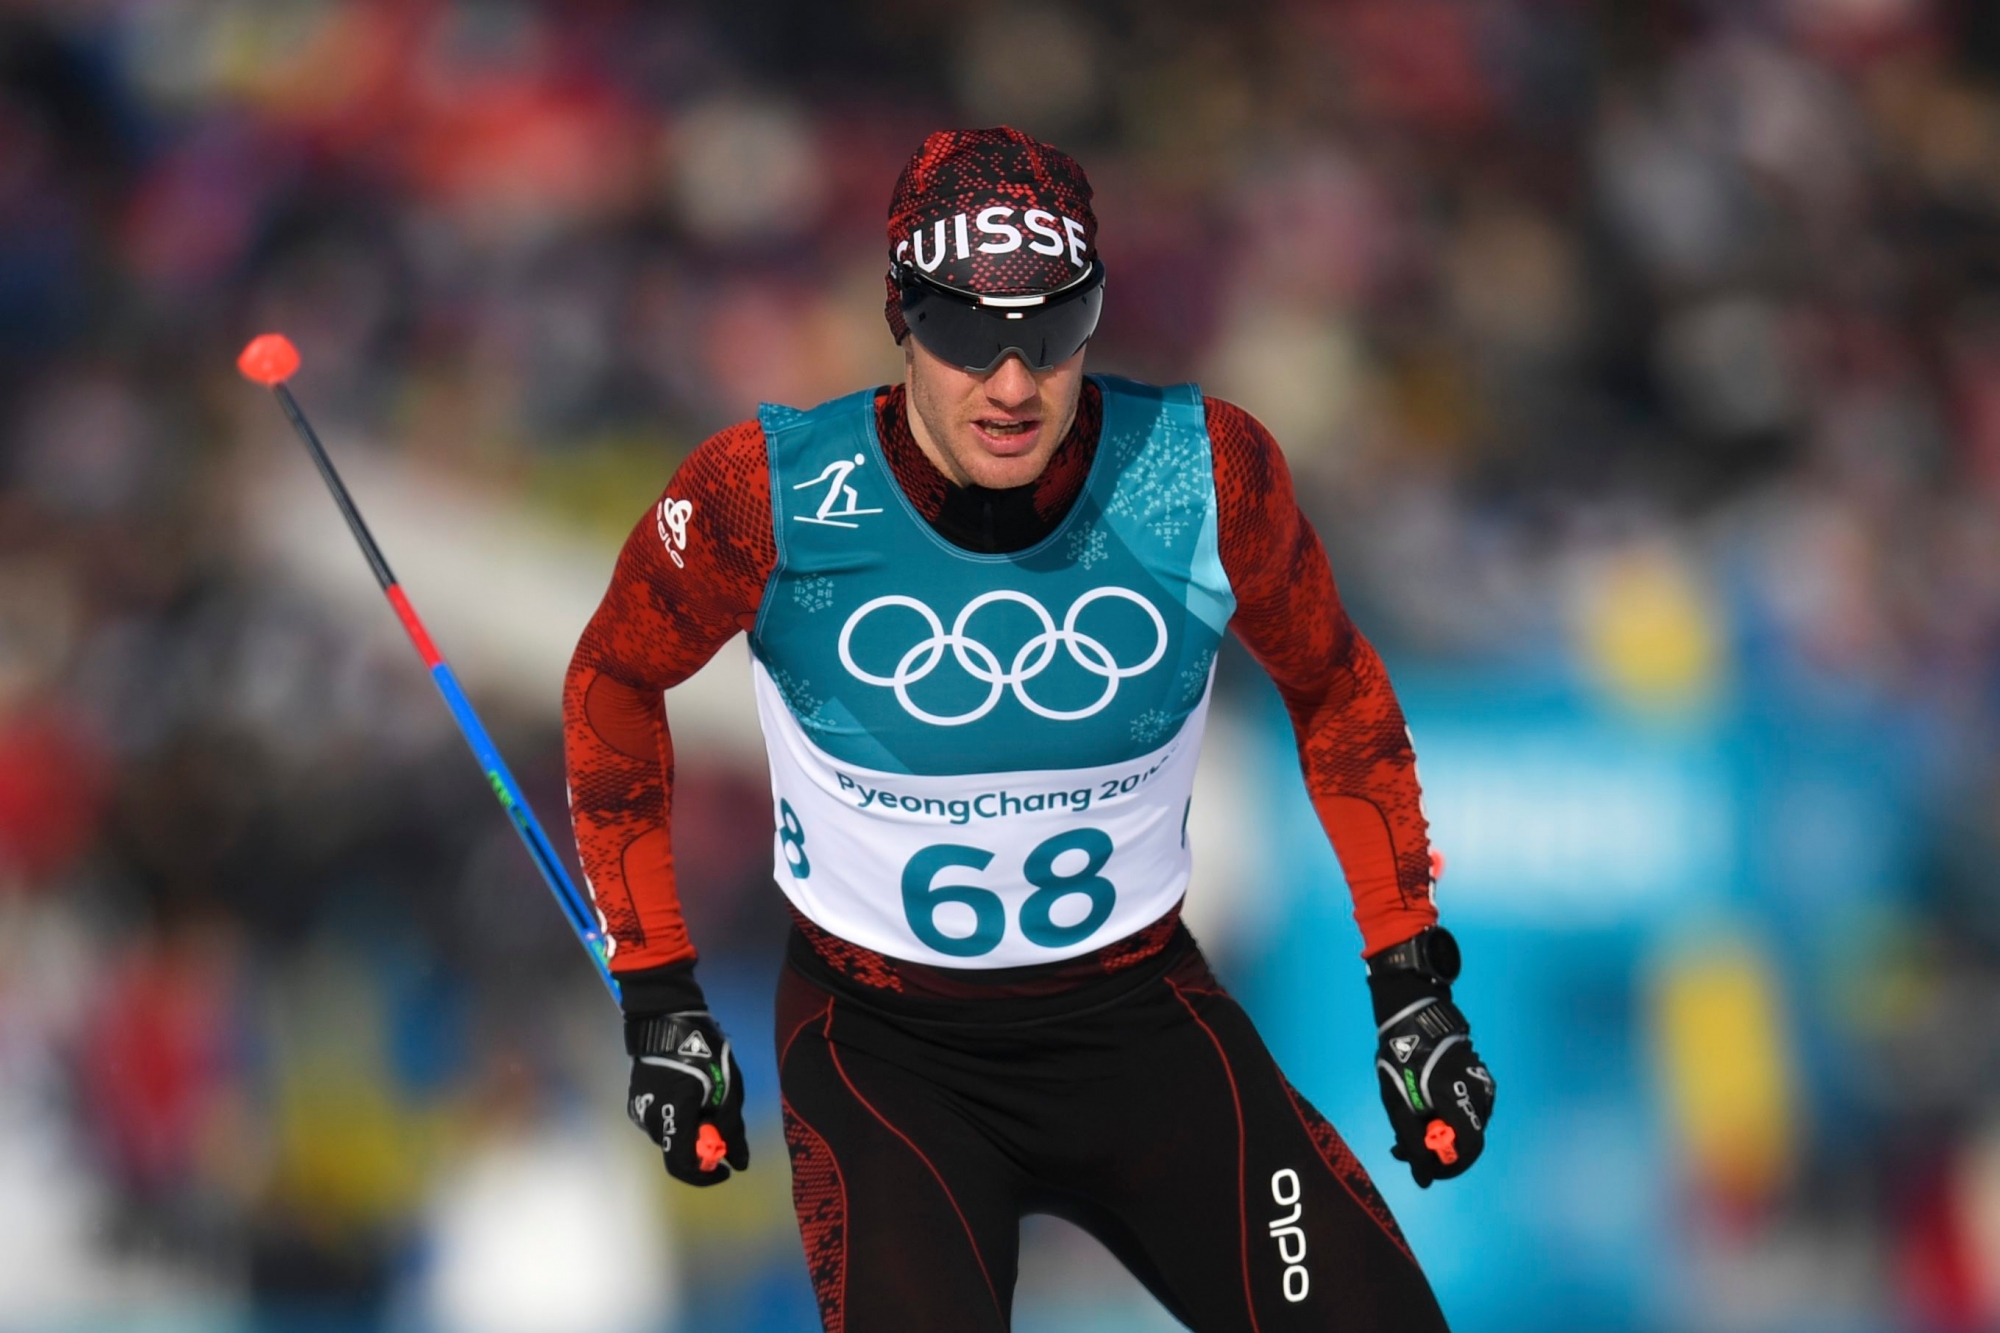 Dario Cologna of Switzerland in action during the men Cross-Country Skiing 15 km free race in the Alpensia Biathlon Center during the XXIII Winter Olympics 2018 in Pyeongchang, South Korea, on Friday, February 16, 2018. (KEYSTONE/Gian Ehrenzeller) PYEONGCHANG 2018 OLYMPICS CROSS-COUNTRY 15 KM